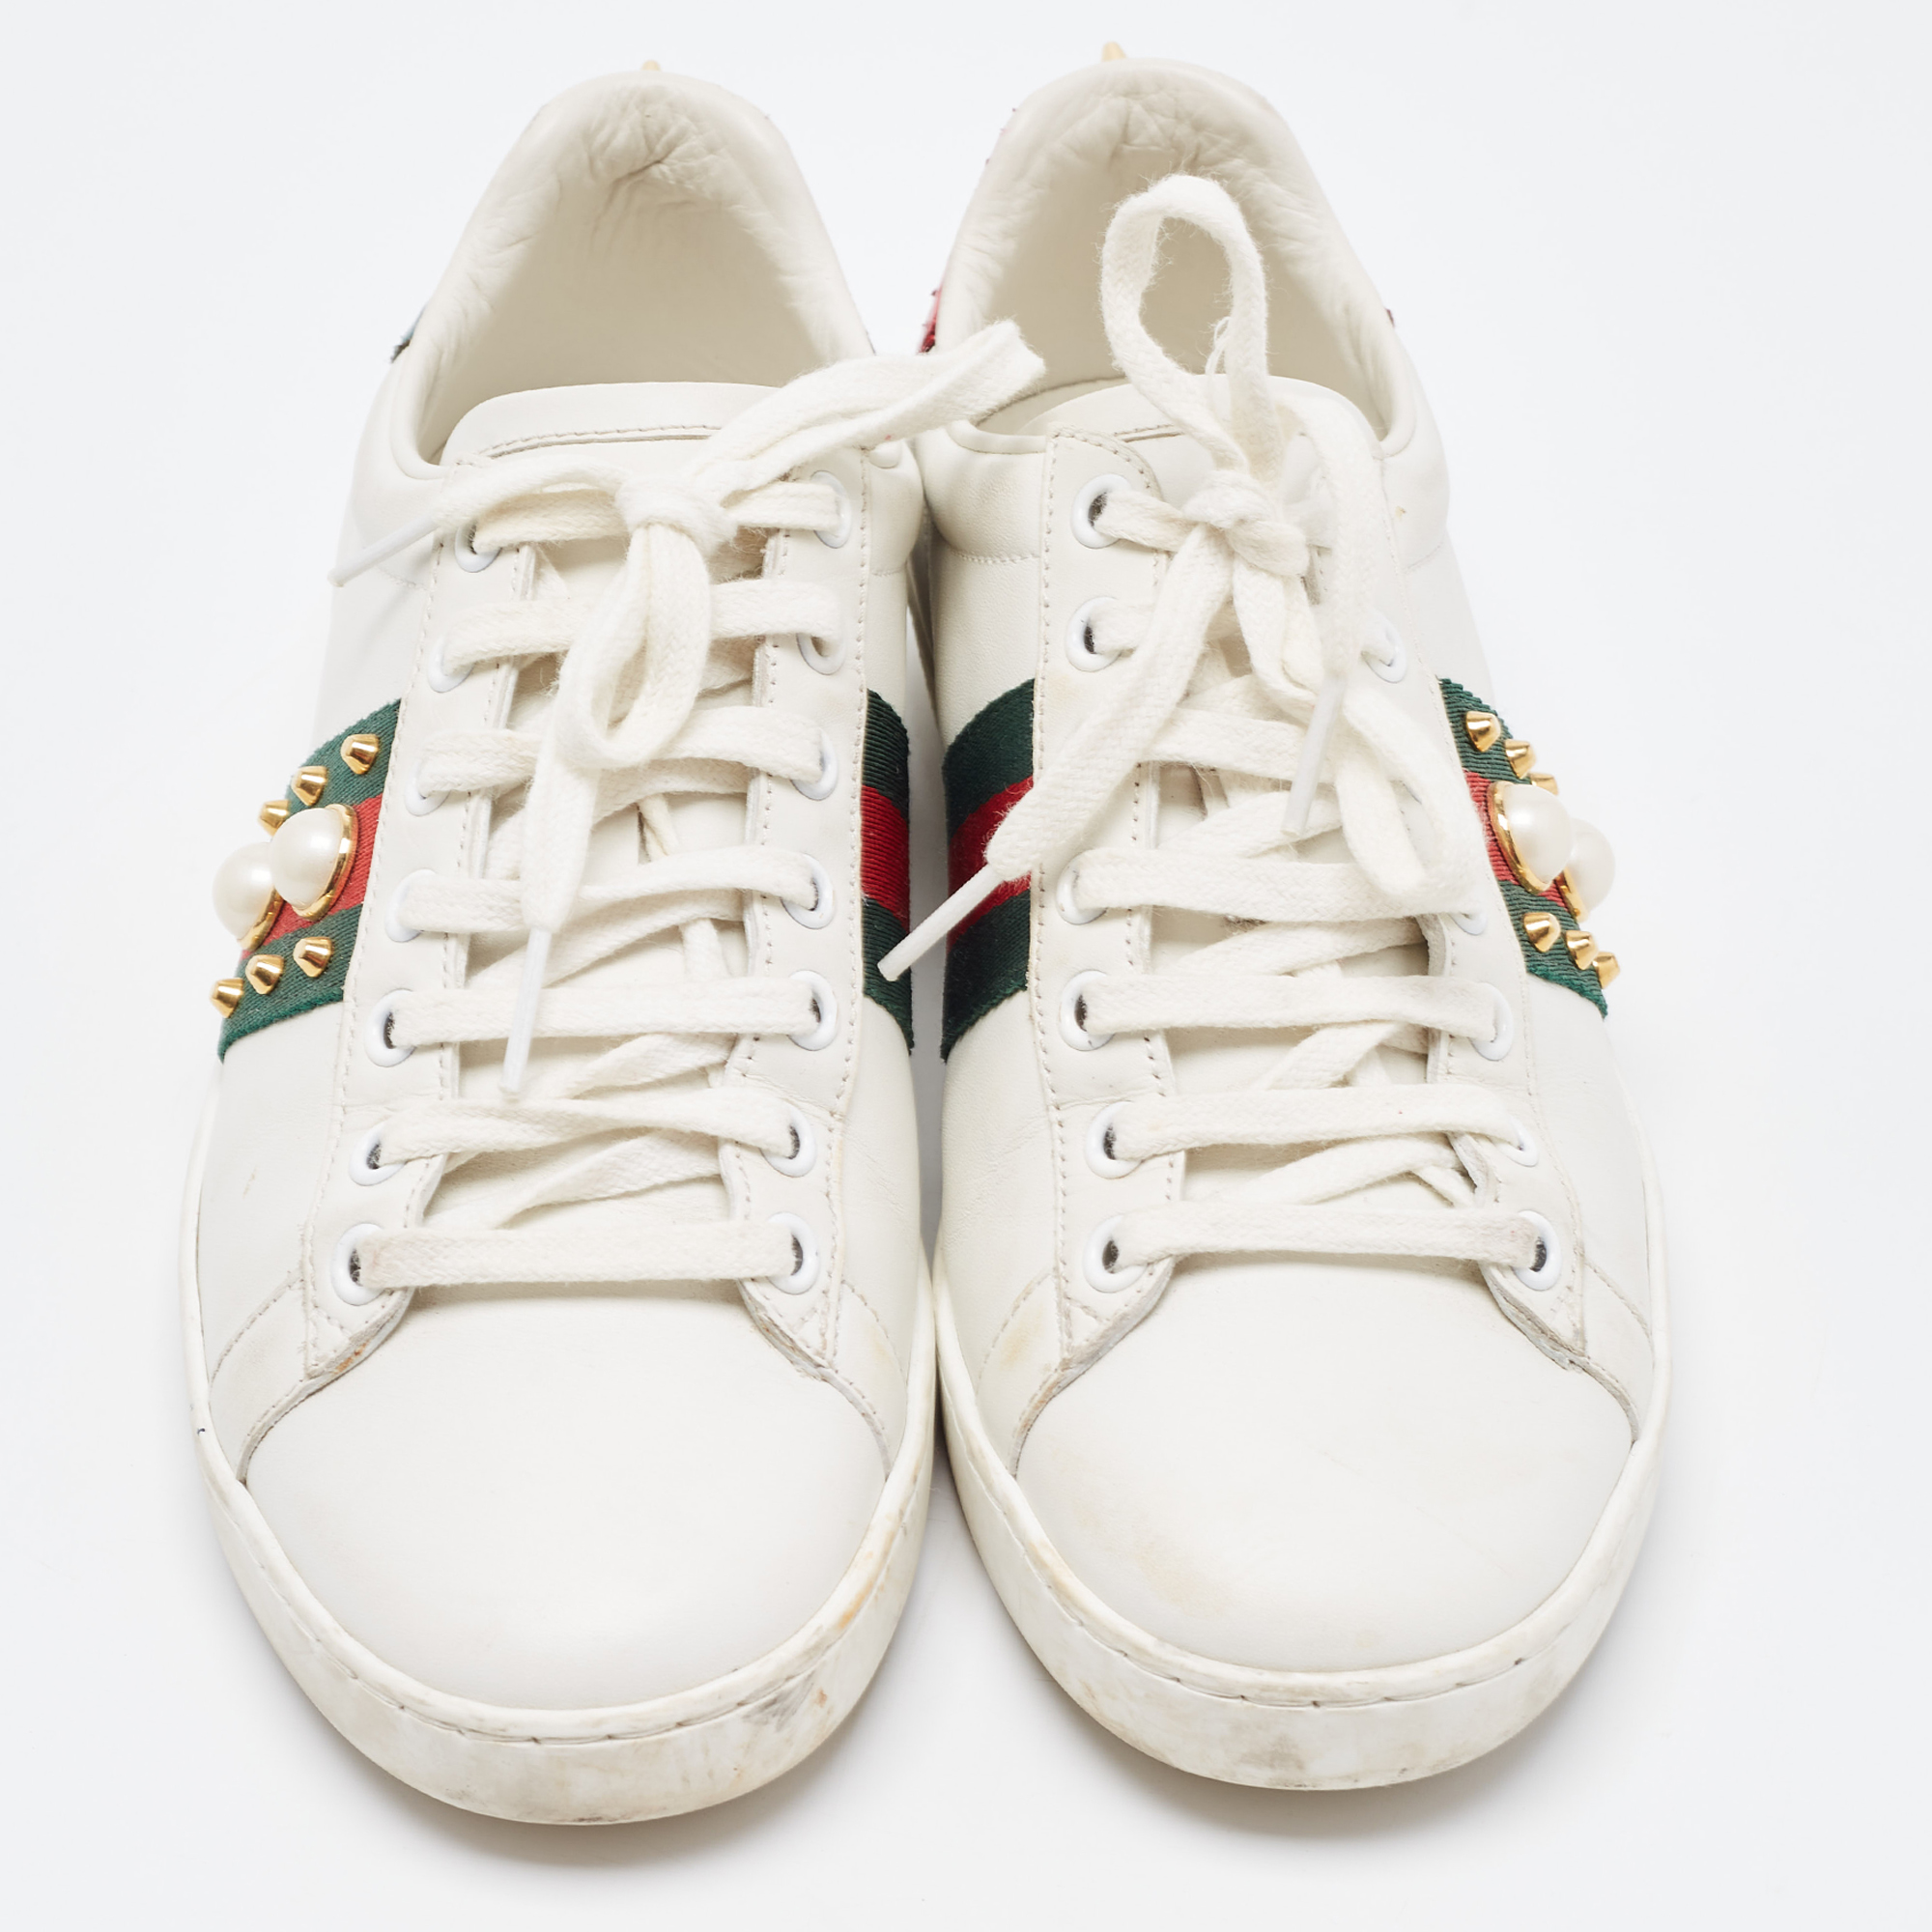 Gucci White Leather Studded And Spiked Ace Sneakers Size 36